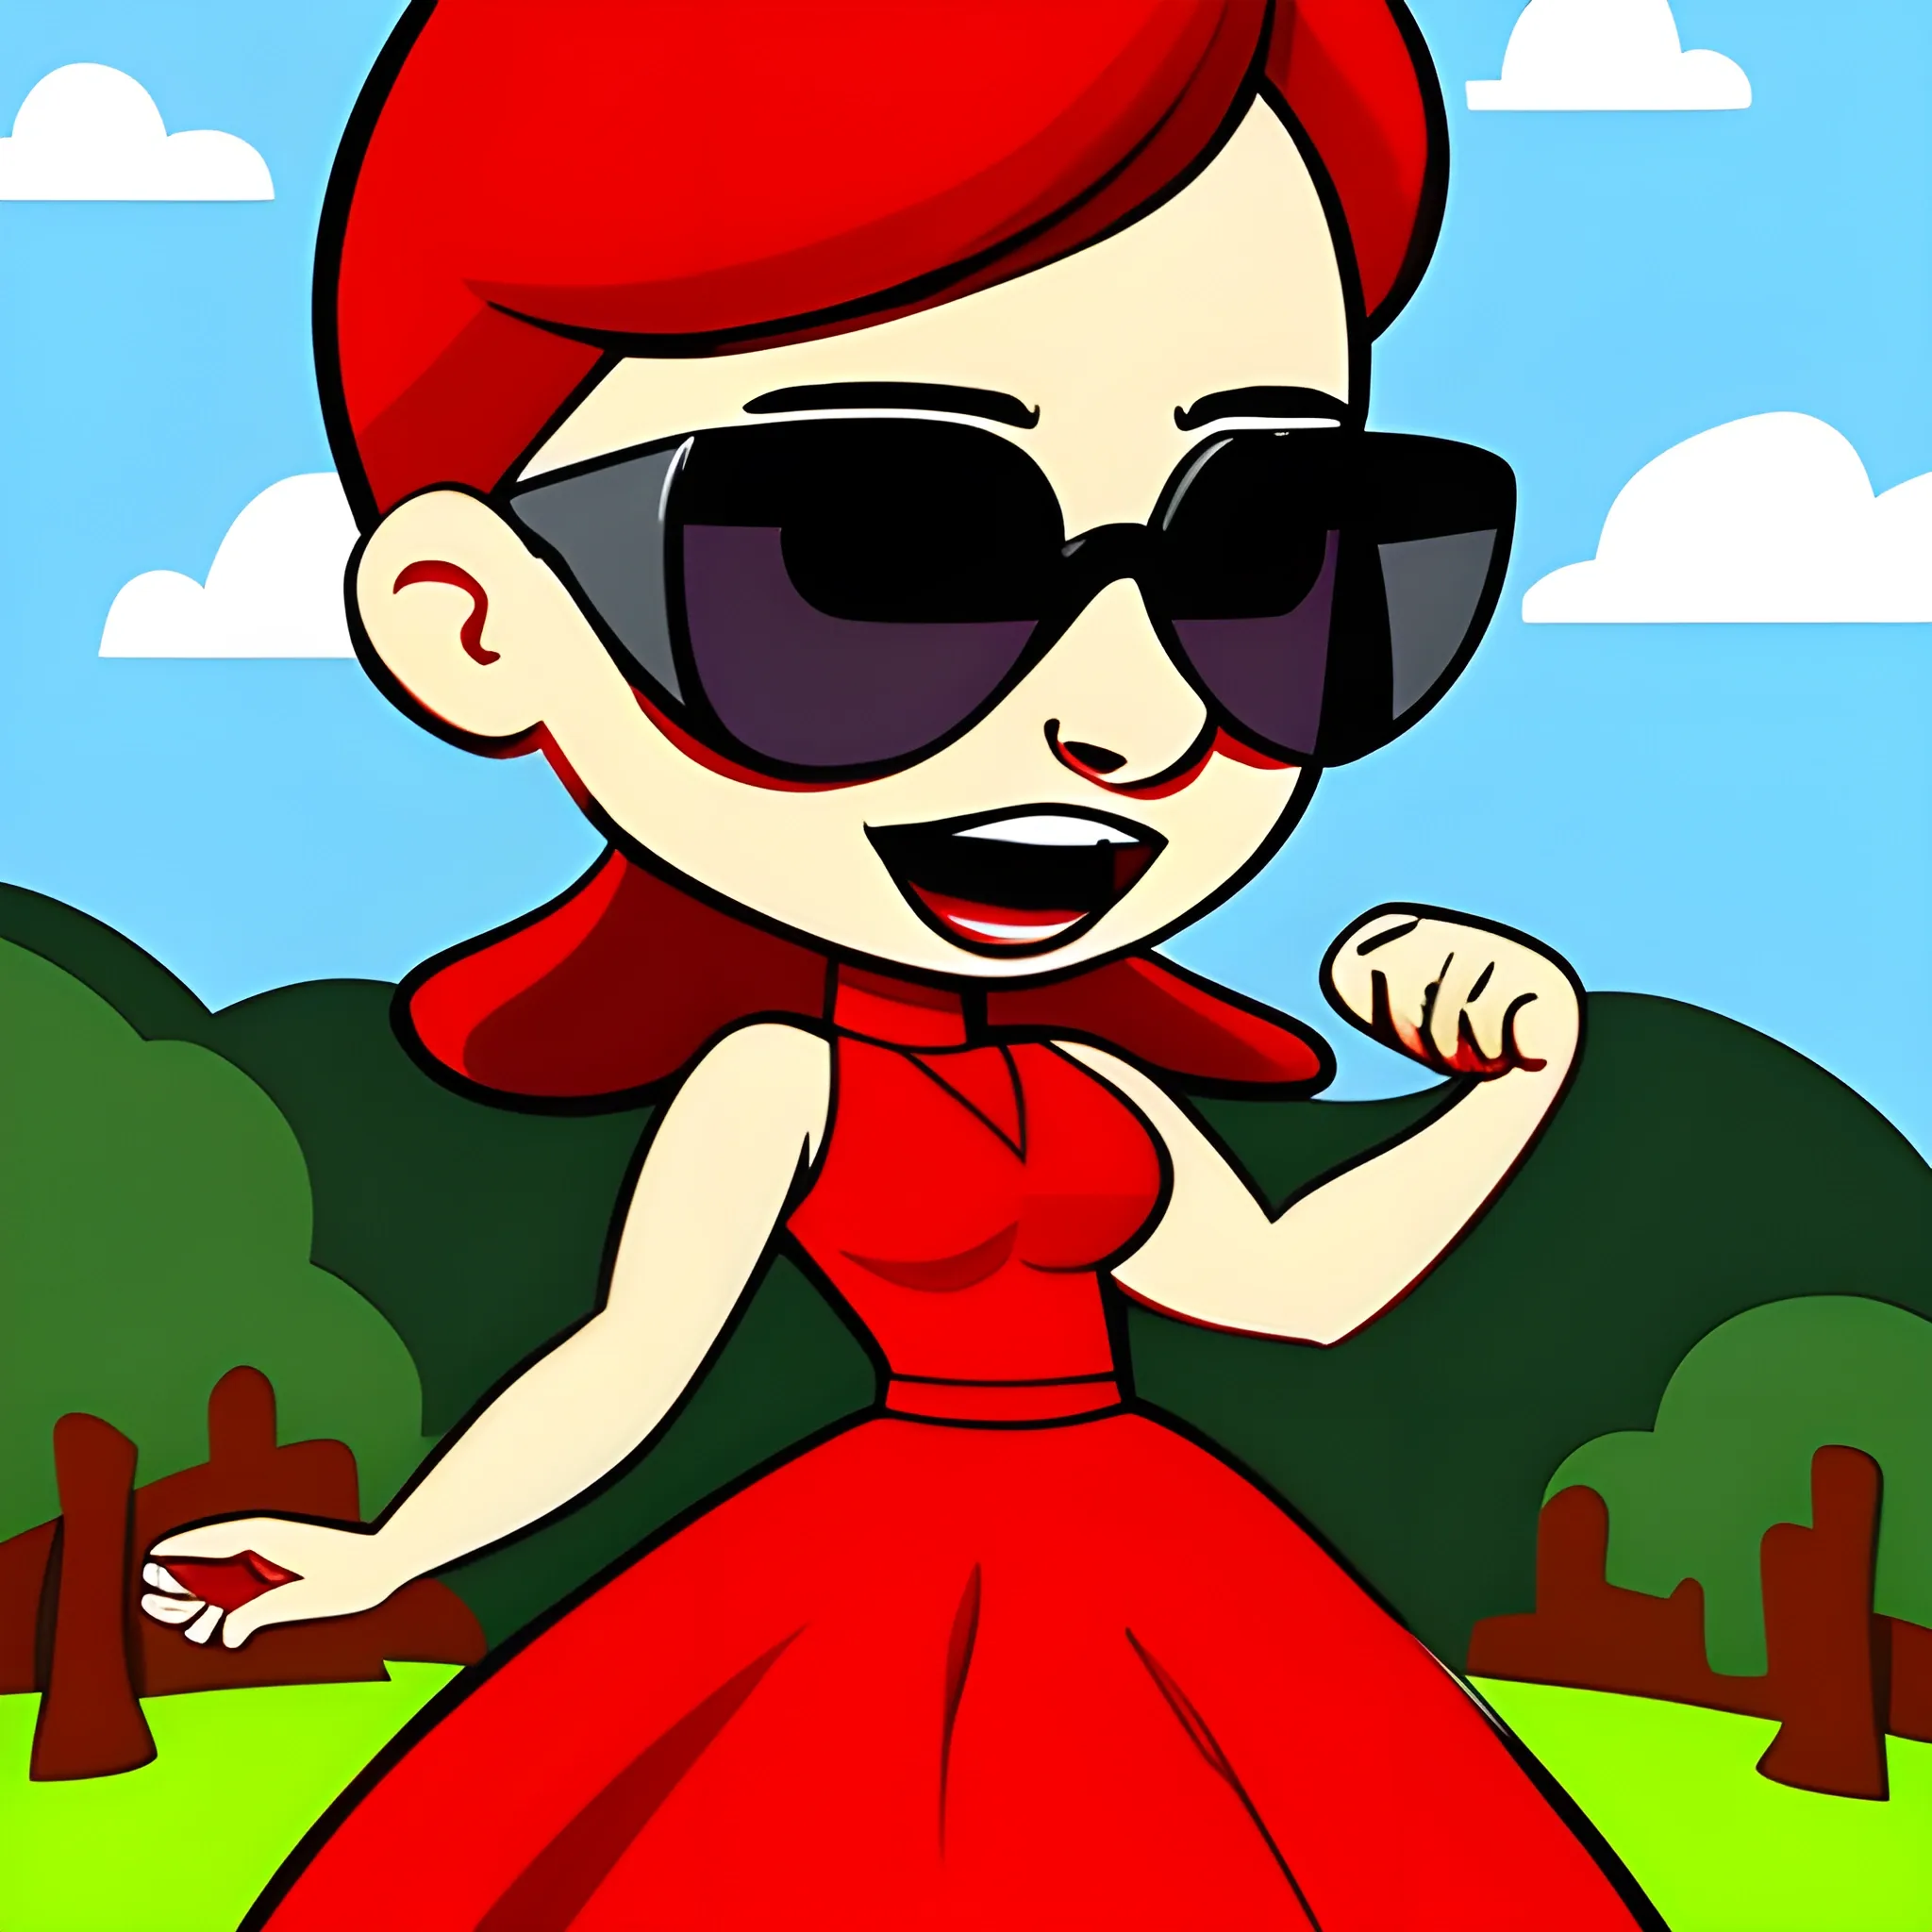 , Cartoon bald guy with sunglasses in a womens red dress